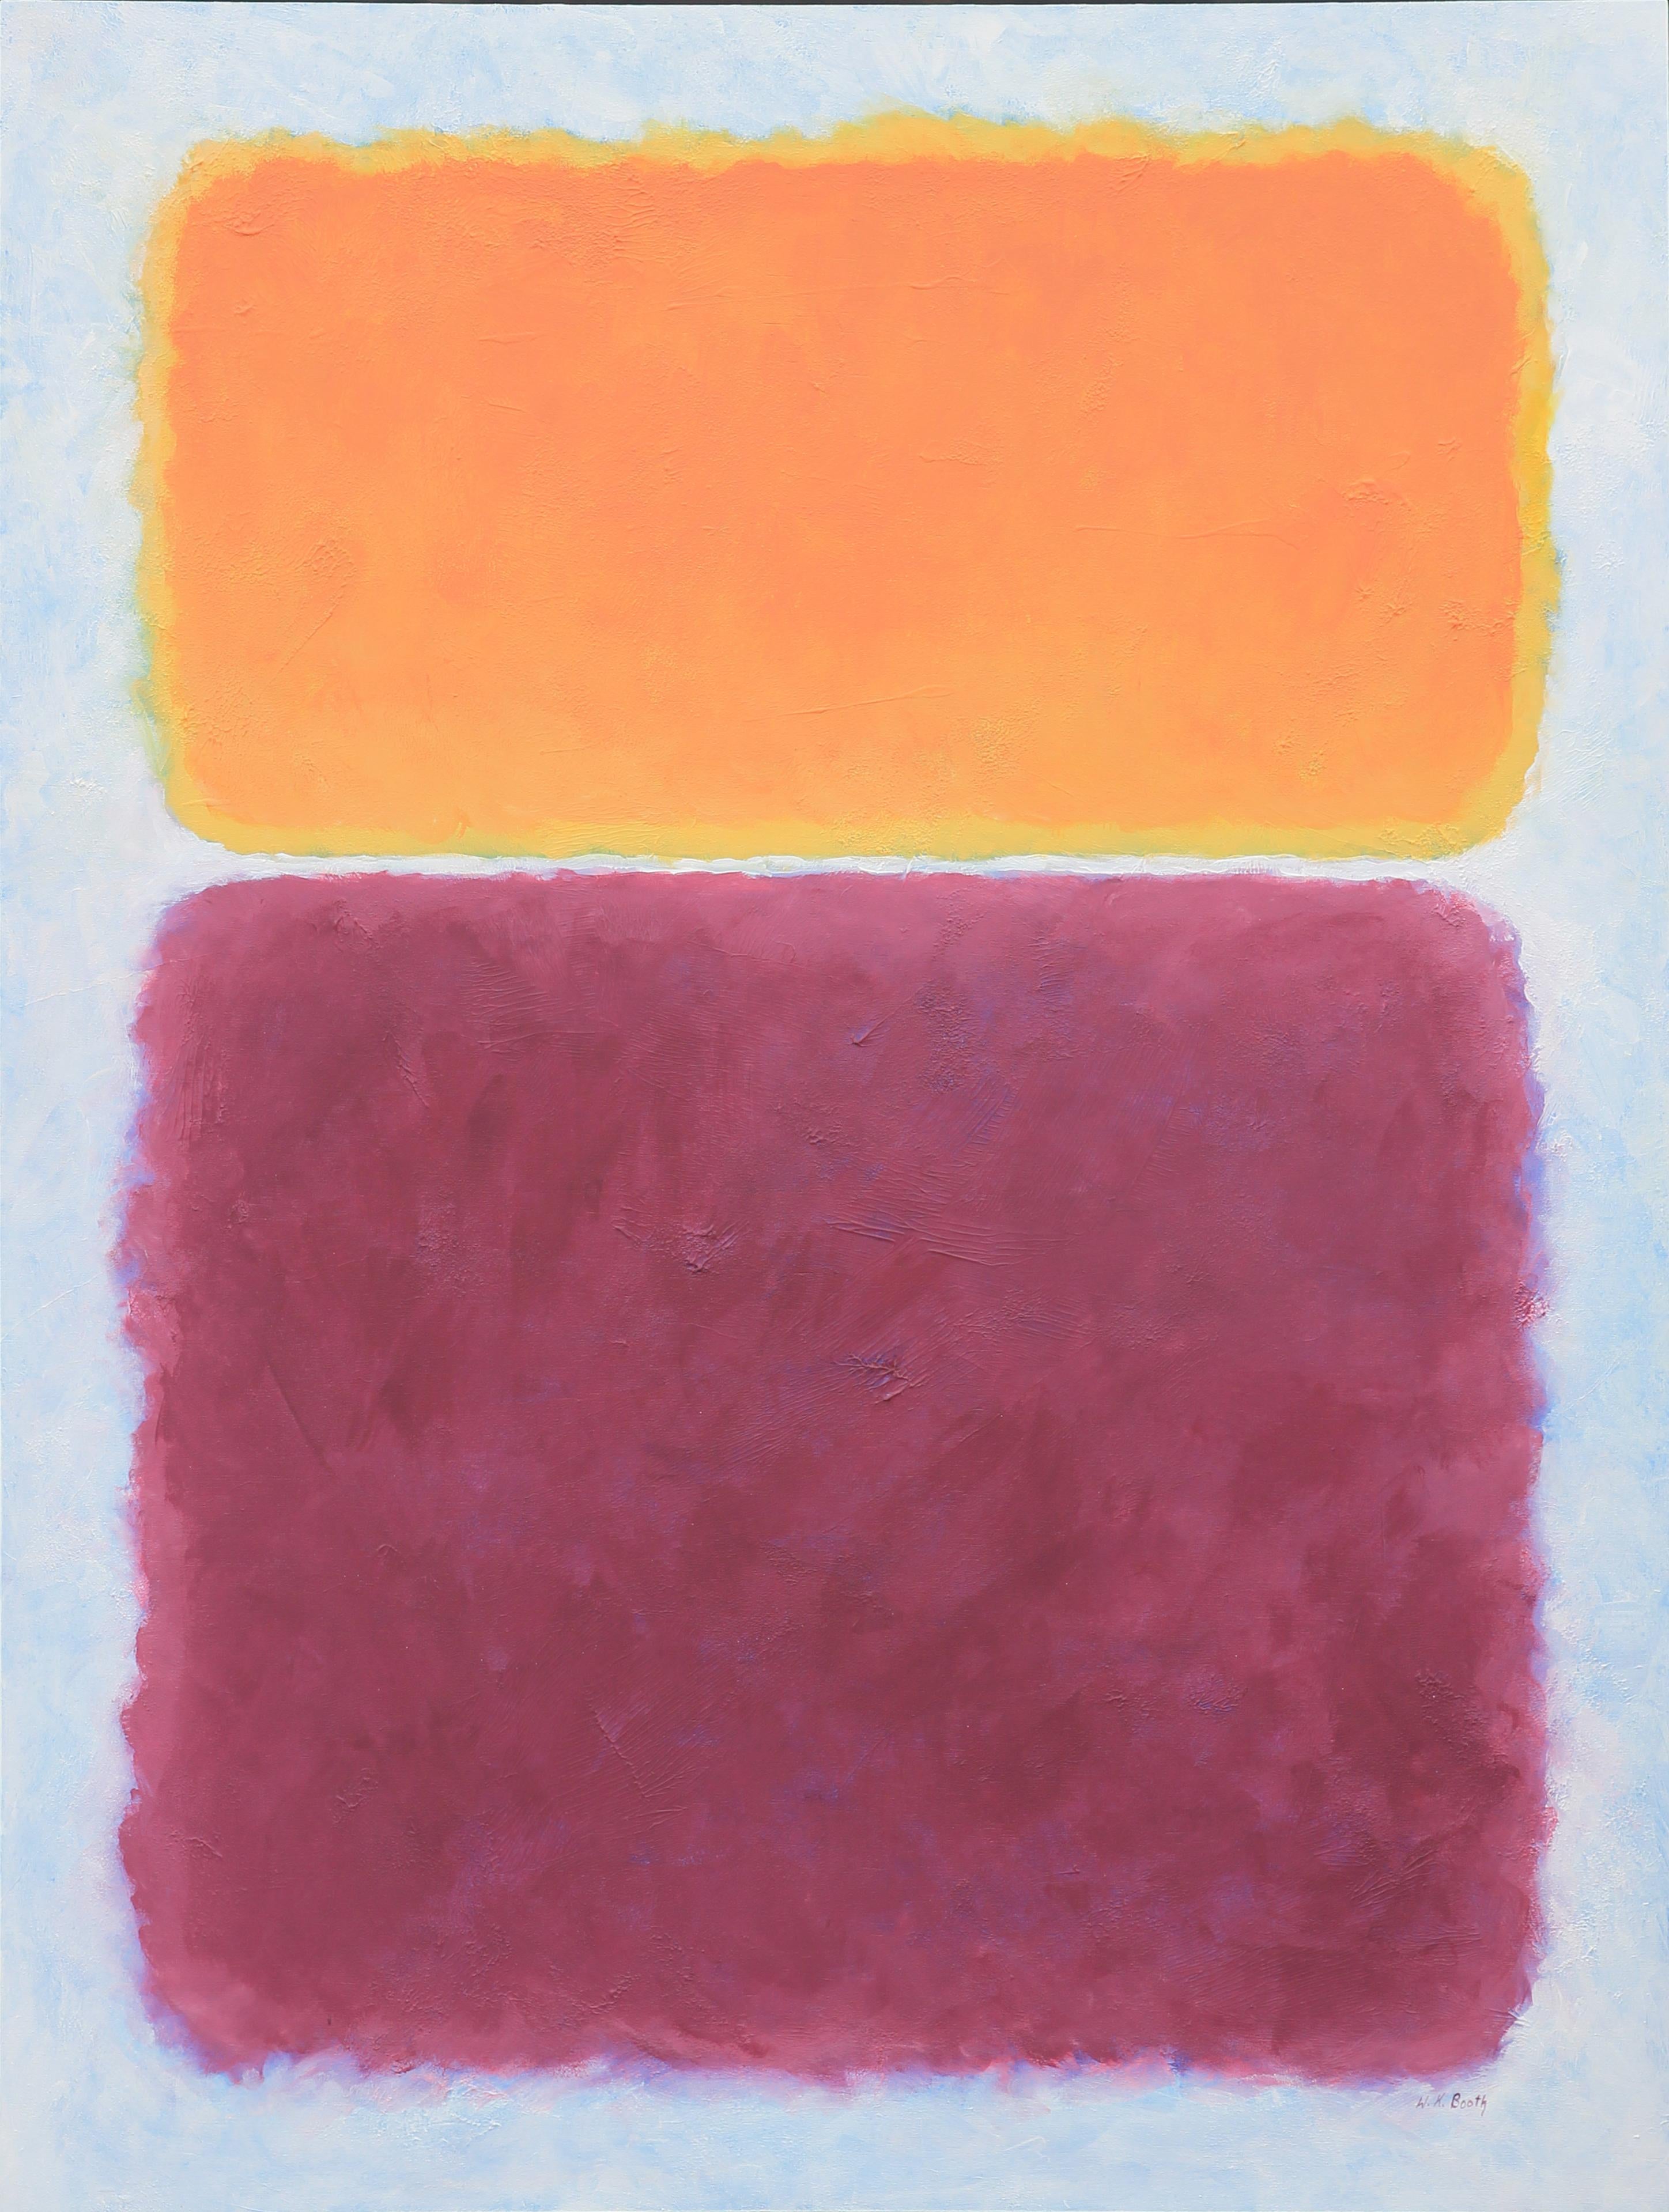 Winifred Booth Abstract Painting - "Daybreak" Magenta and Orange Mark Rothko-Inspired Abstract Geometric Painting